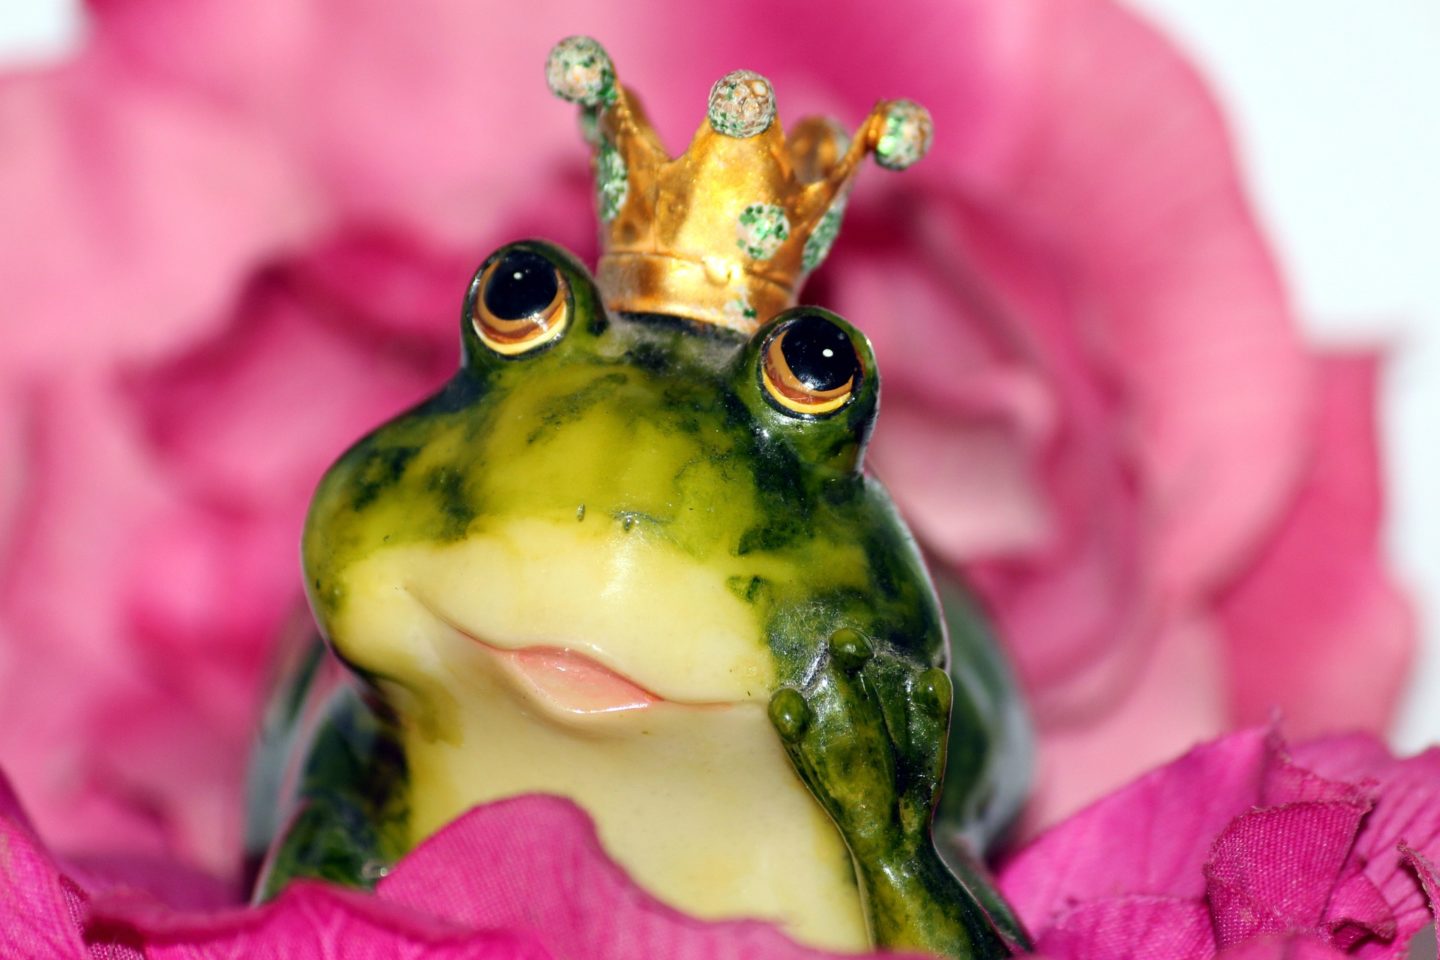 French Kissing Frogs: Dating after Divorce